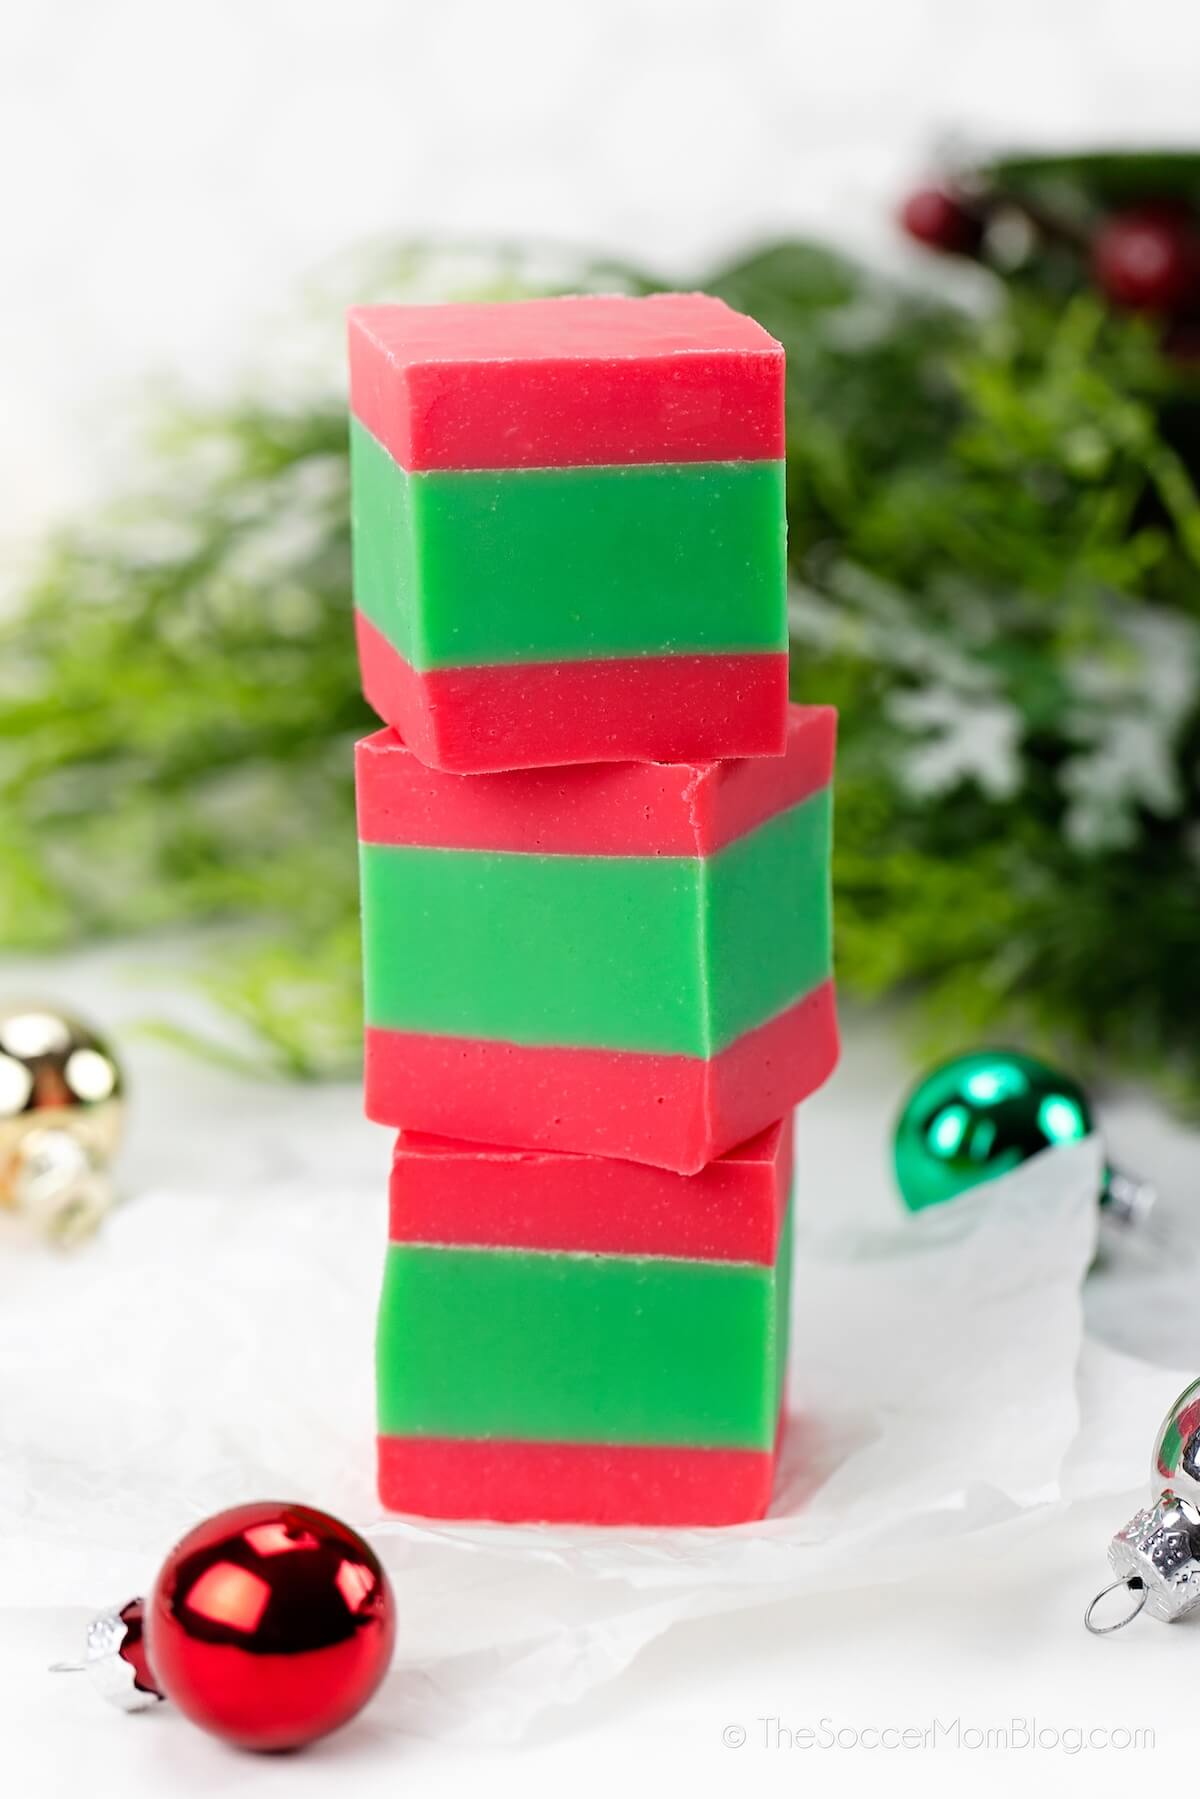 3 squares of red and green Christmas fudge stacked on top of each other